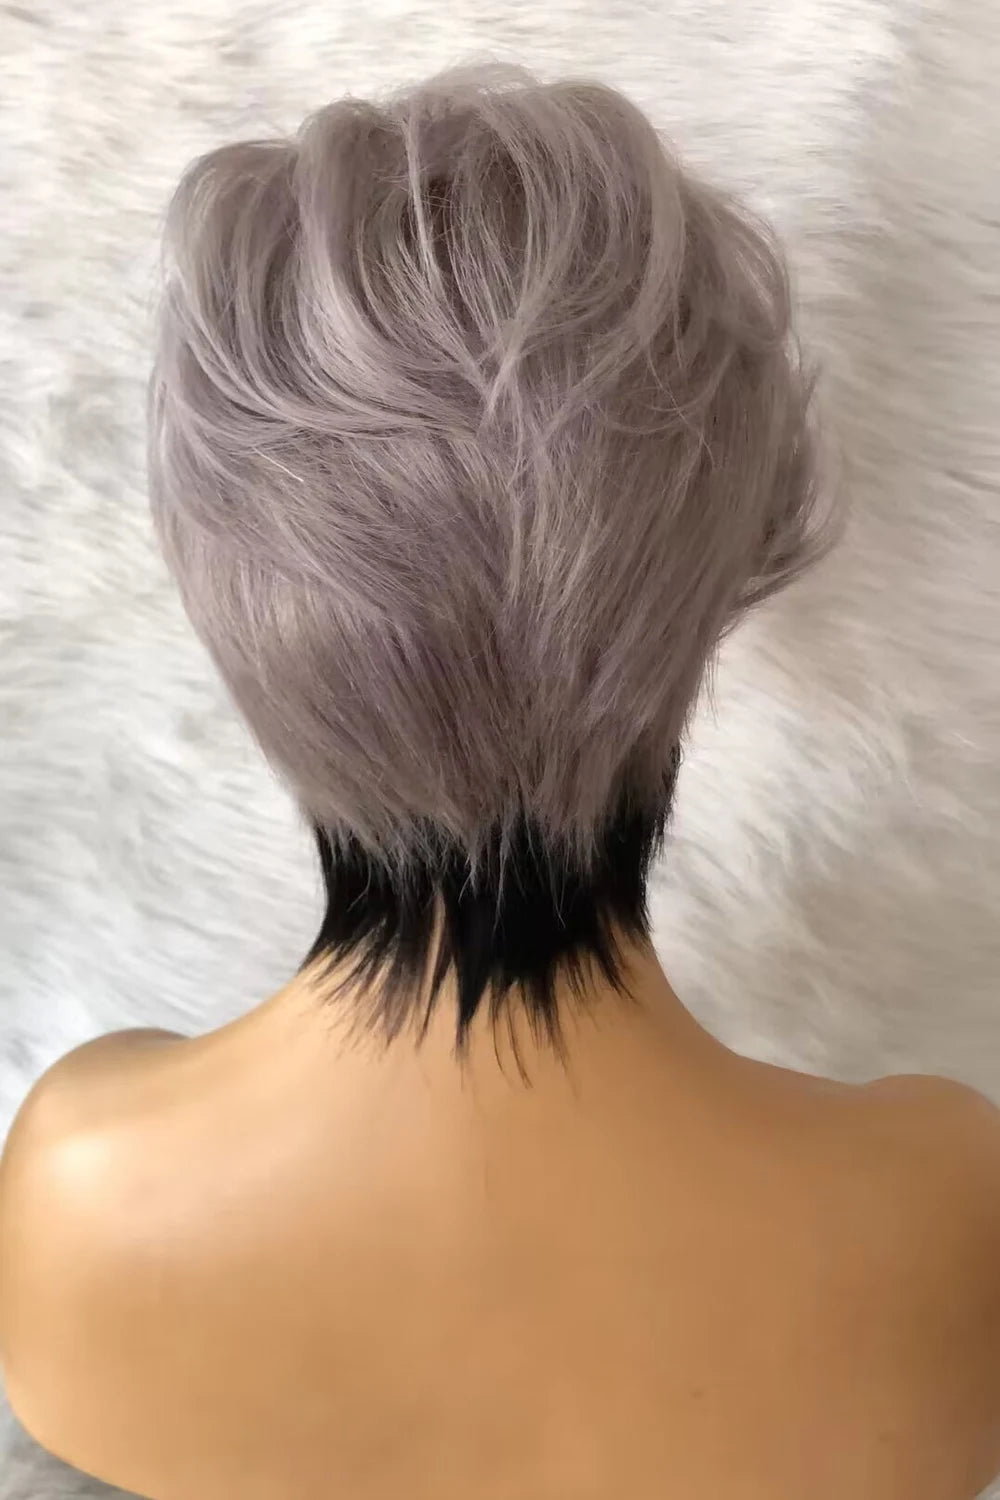 short-pixie-cut-wig-layered-13x4-lace-front-gray-hair-3